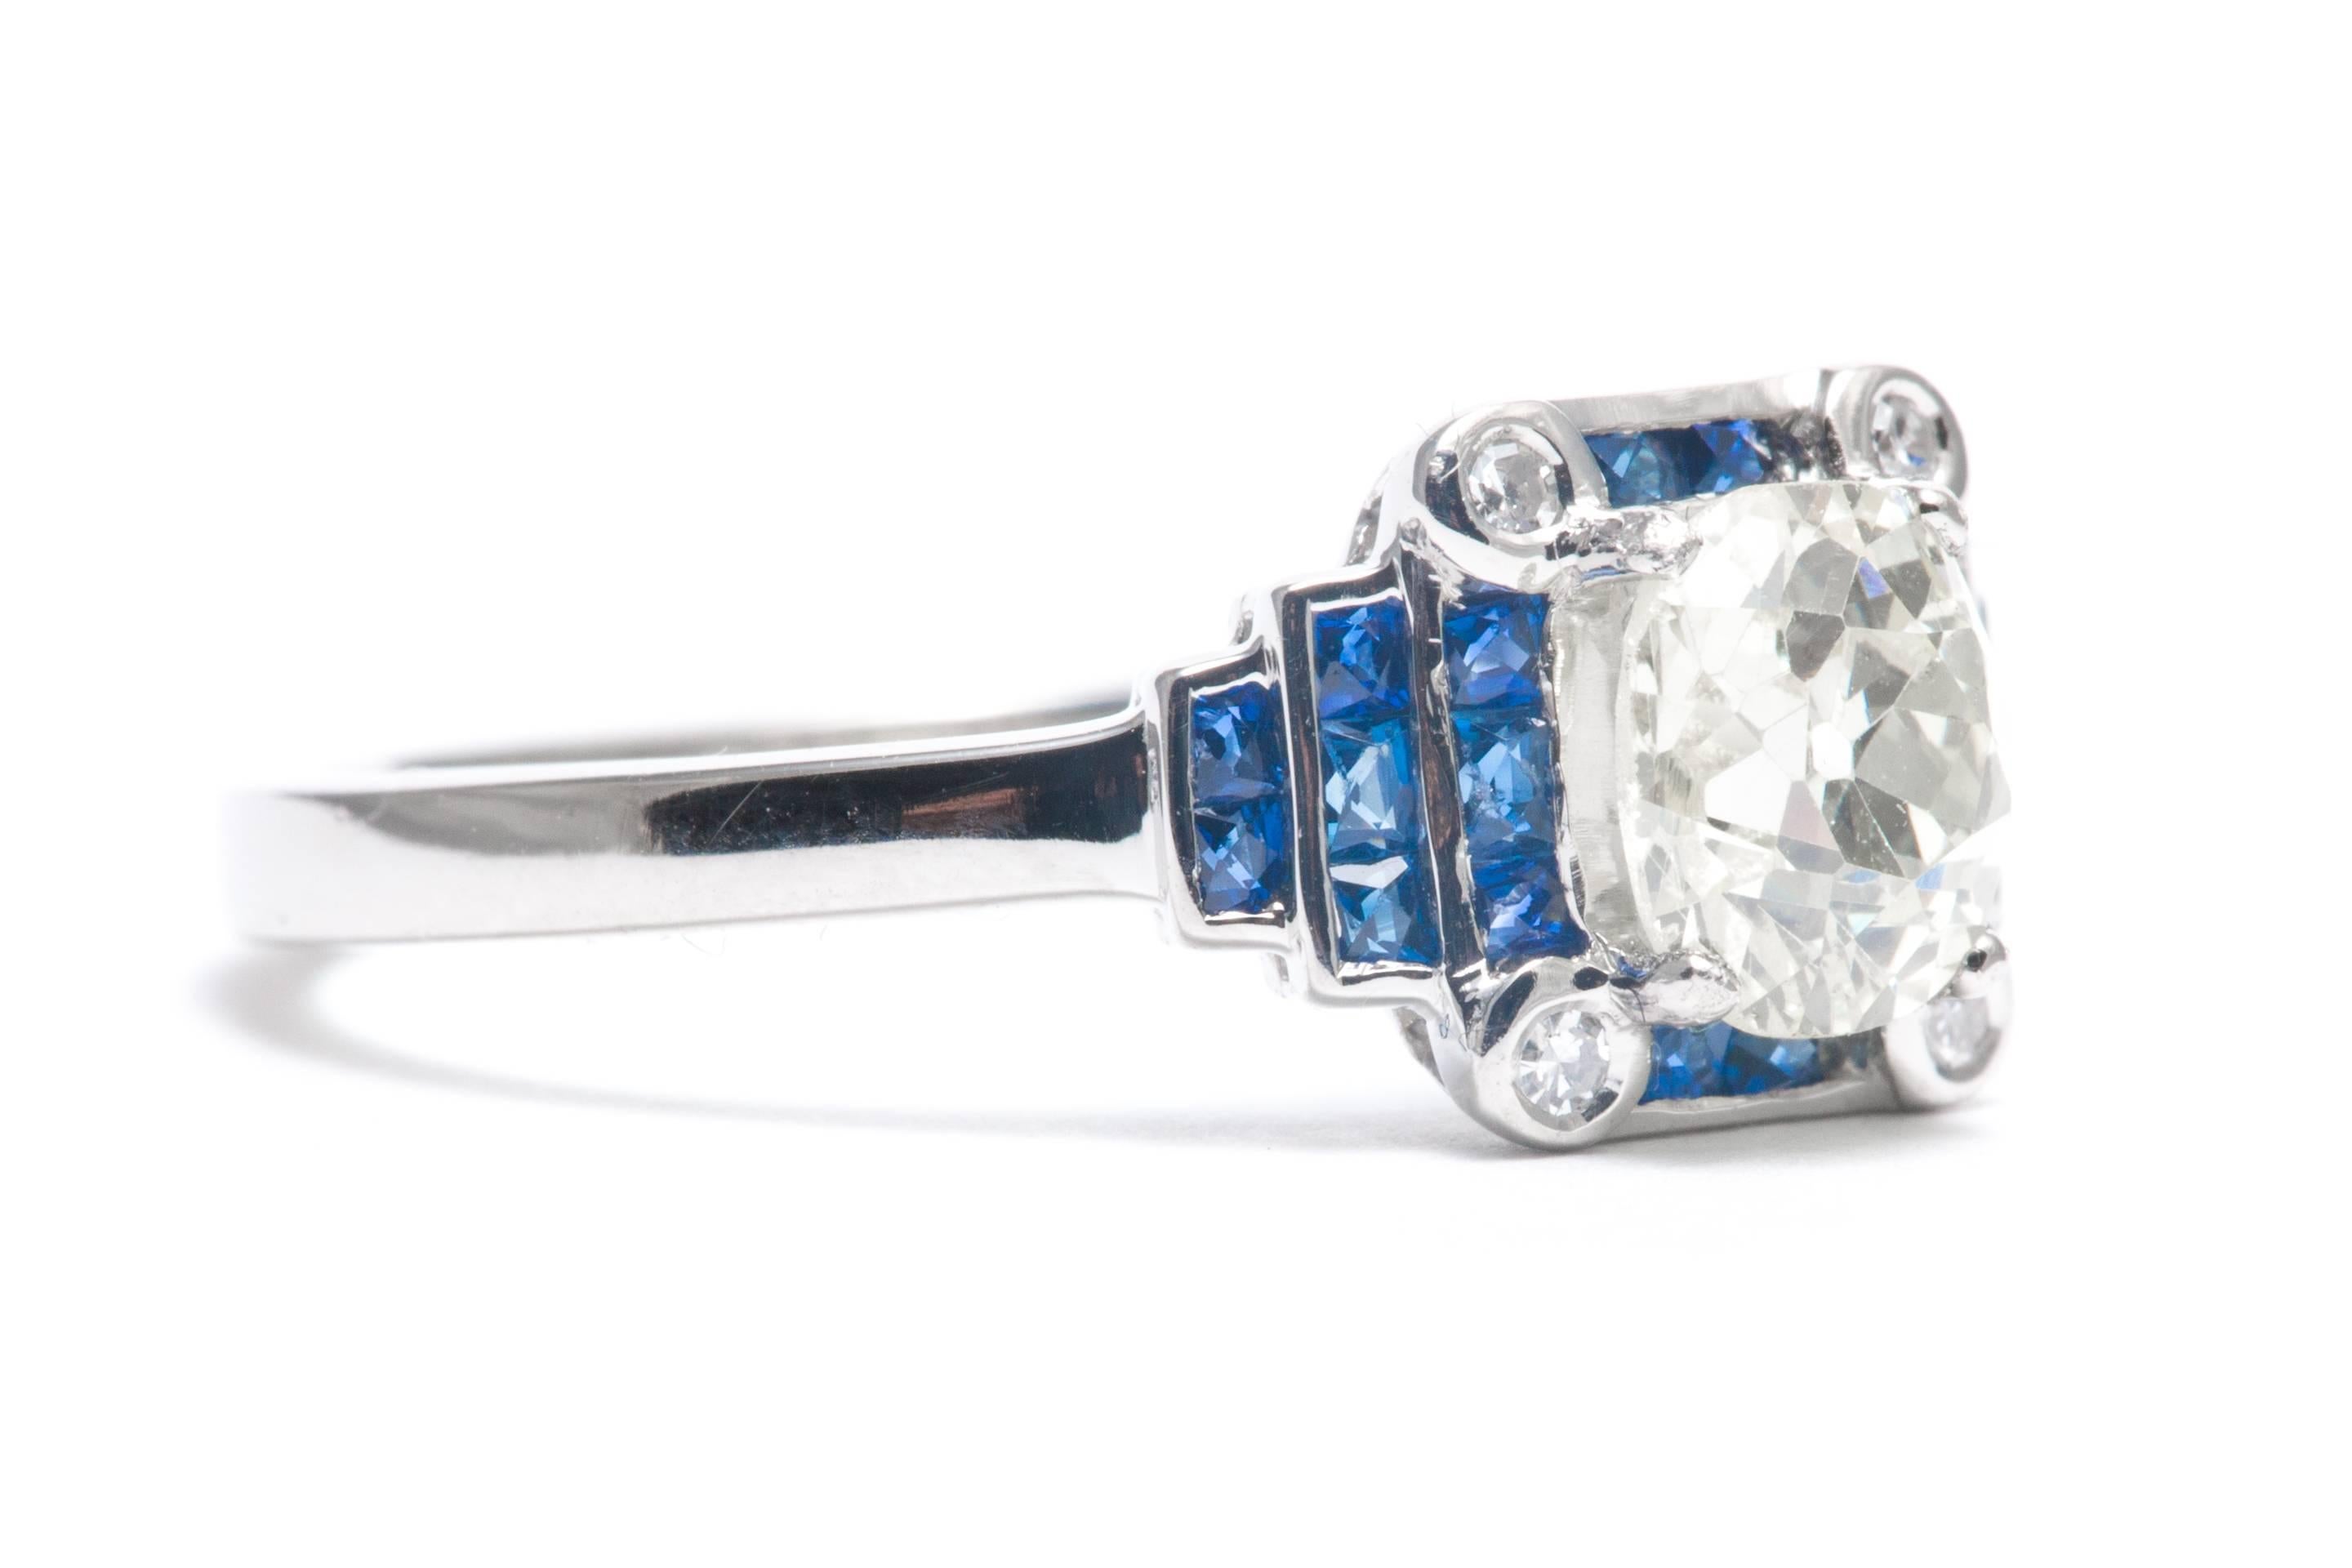 A beautiful stepped design diamond and sapphire engagement ring in luxurious platinum.  Centered by a 1.05 carat antique European cut cushion shaped diamond, this ring features a border of rich vivid blue French cut sapphires surrounding the center